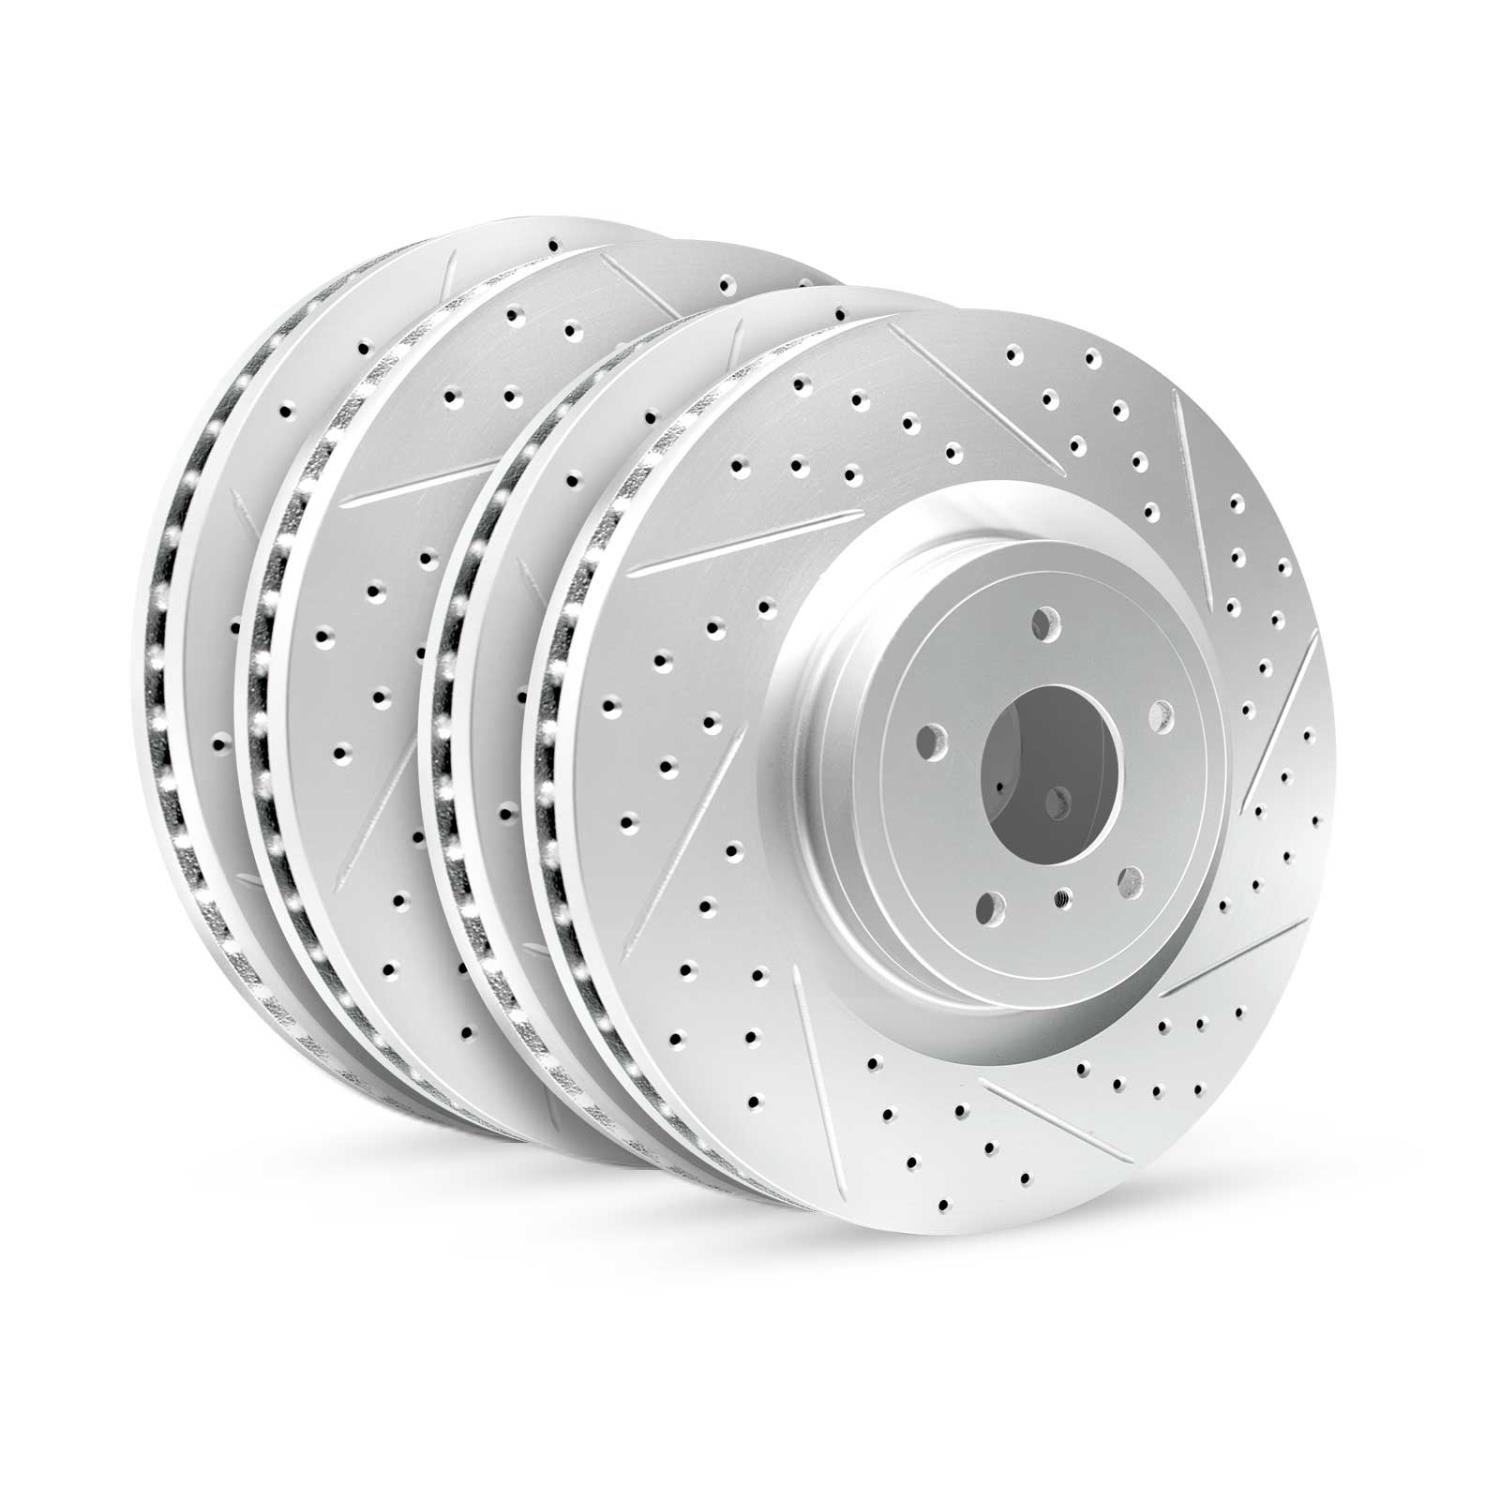 GEO-Carbon Drilled/Slotted Rotors, 2000-2008